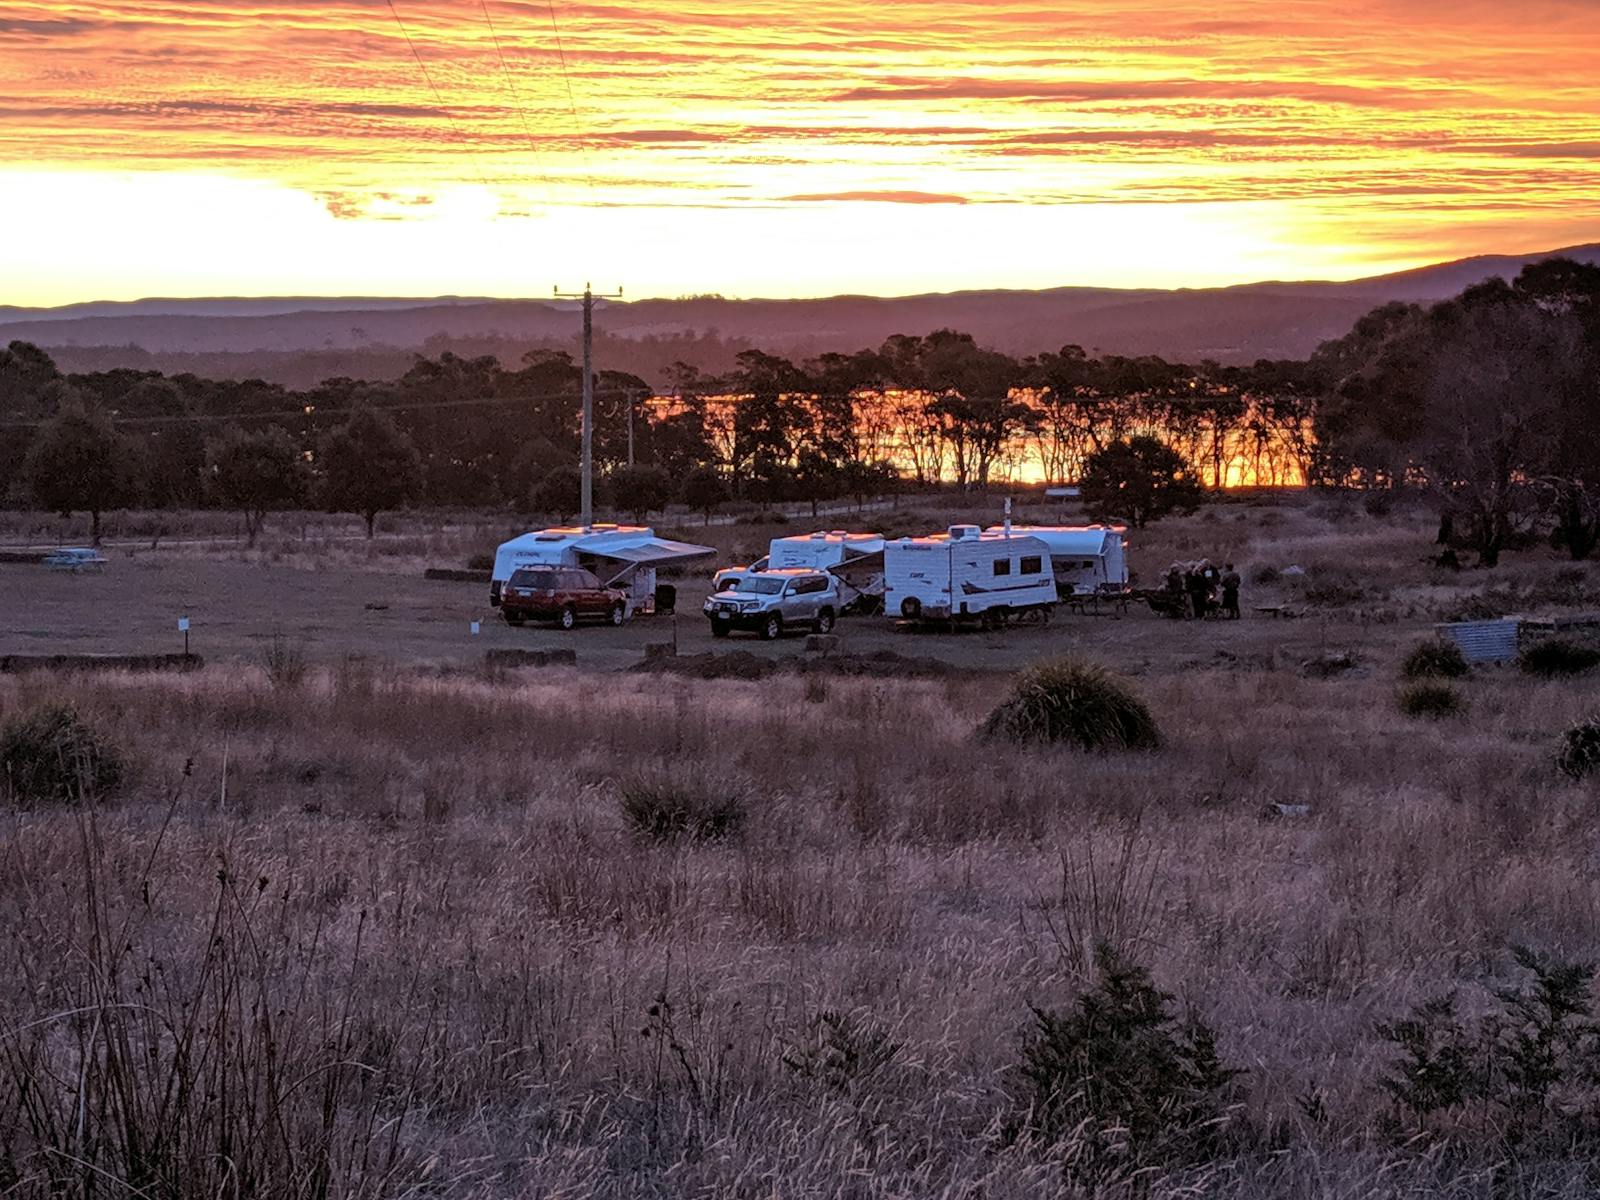 A gorgeous sunset over Moulting Lagoon creating the perfect backdrop for campers